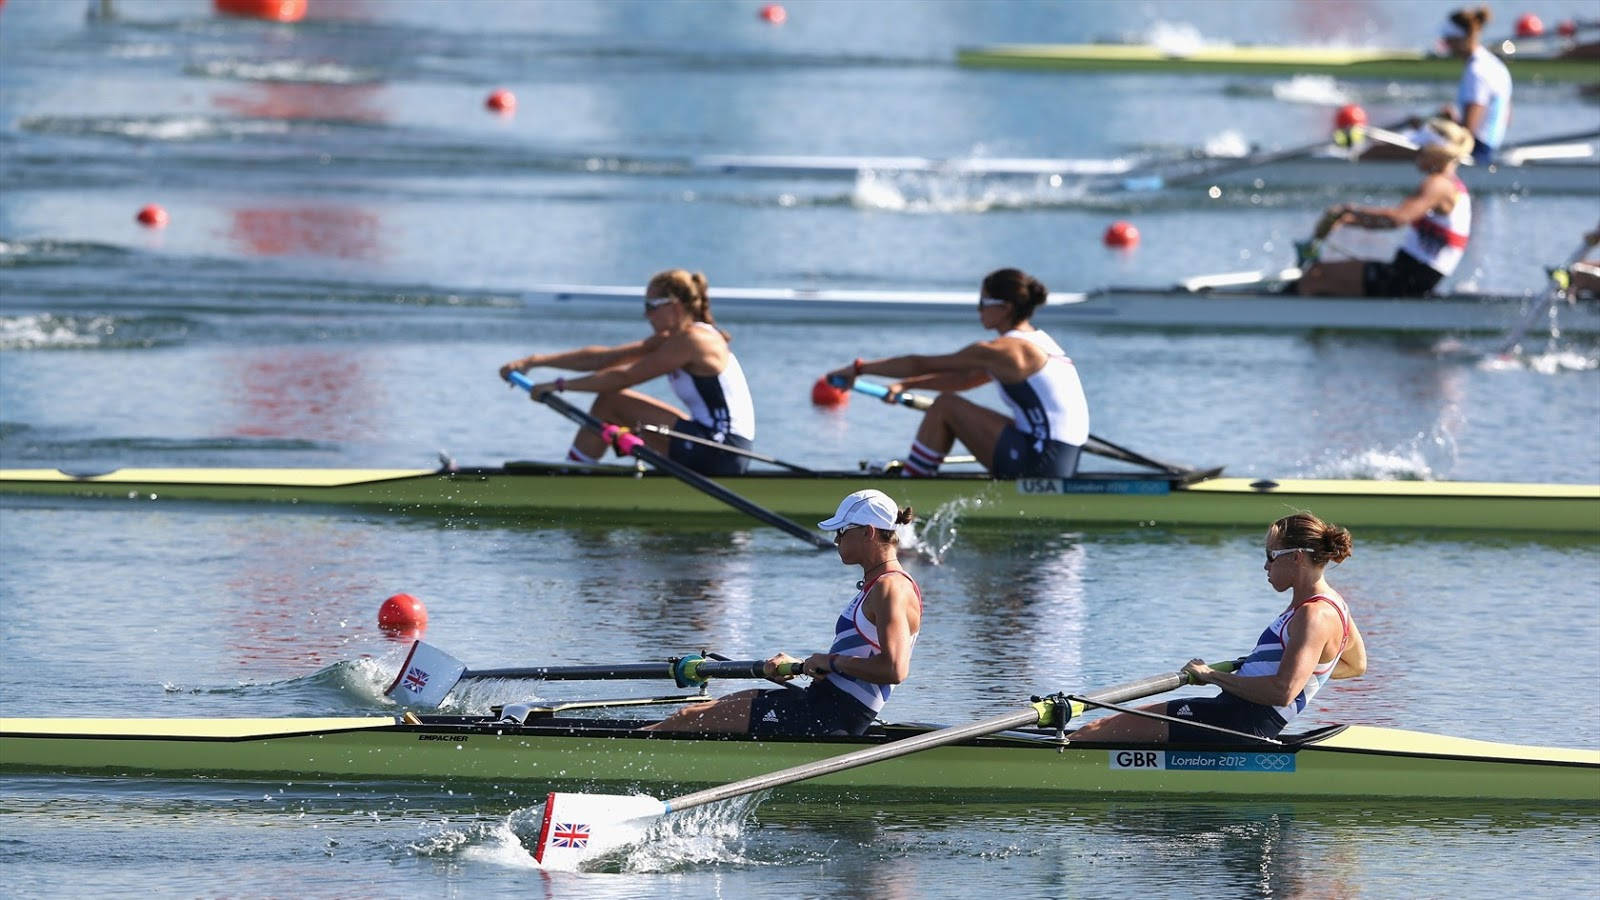 Coxless Pair Women's Rowing Competition